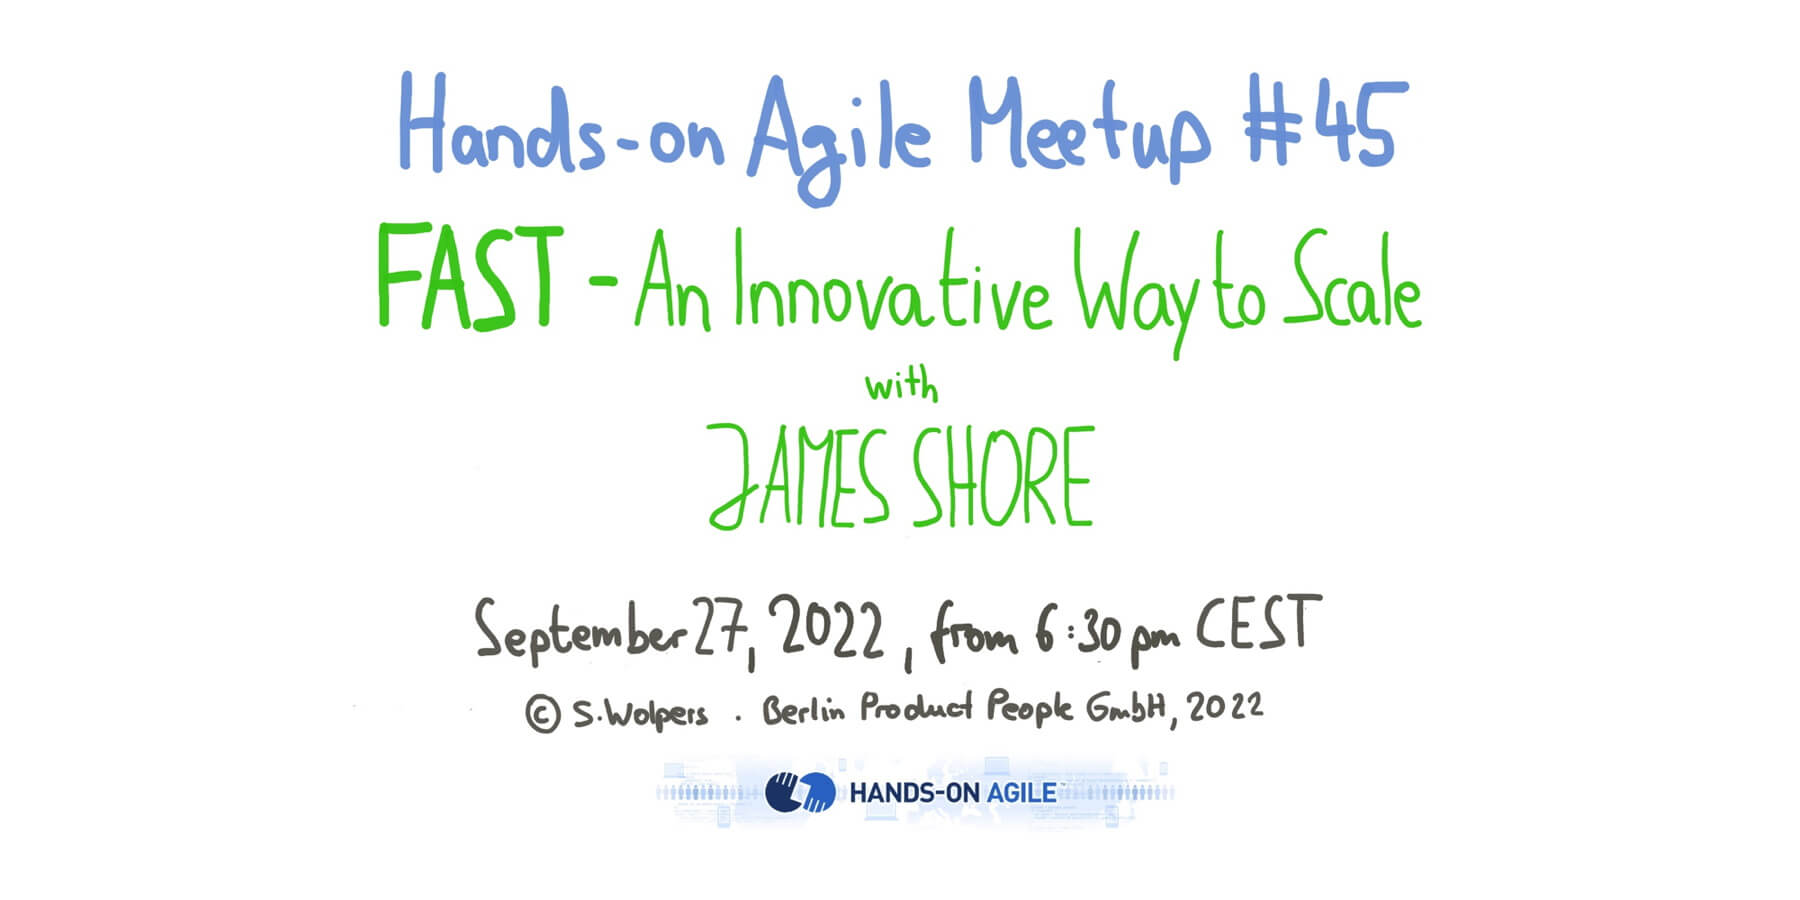 Hands-on Agile #45: FAST: An Innovative Way to Scale mit James Shore — Berlin Product People GmbH